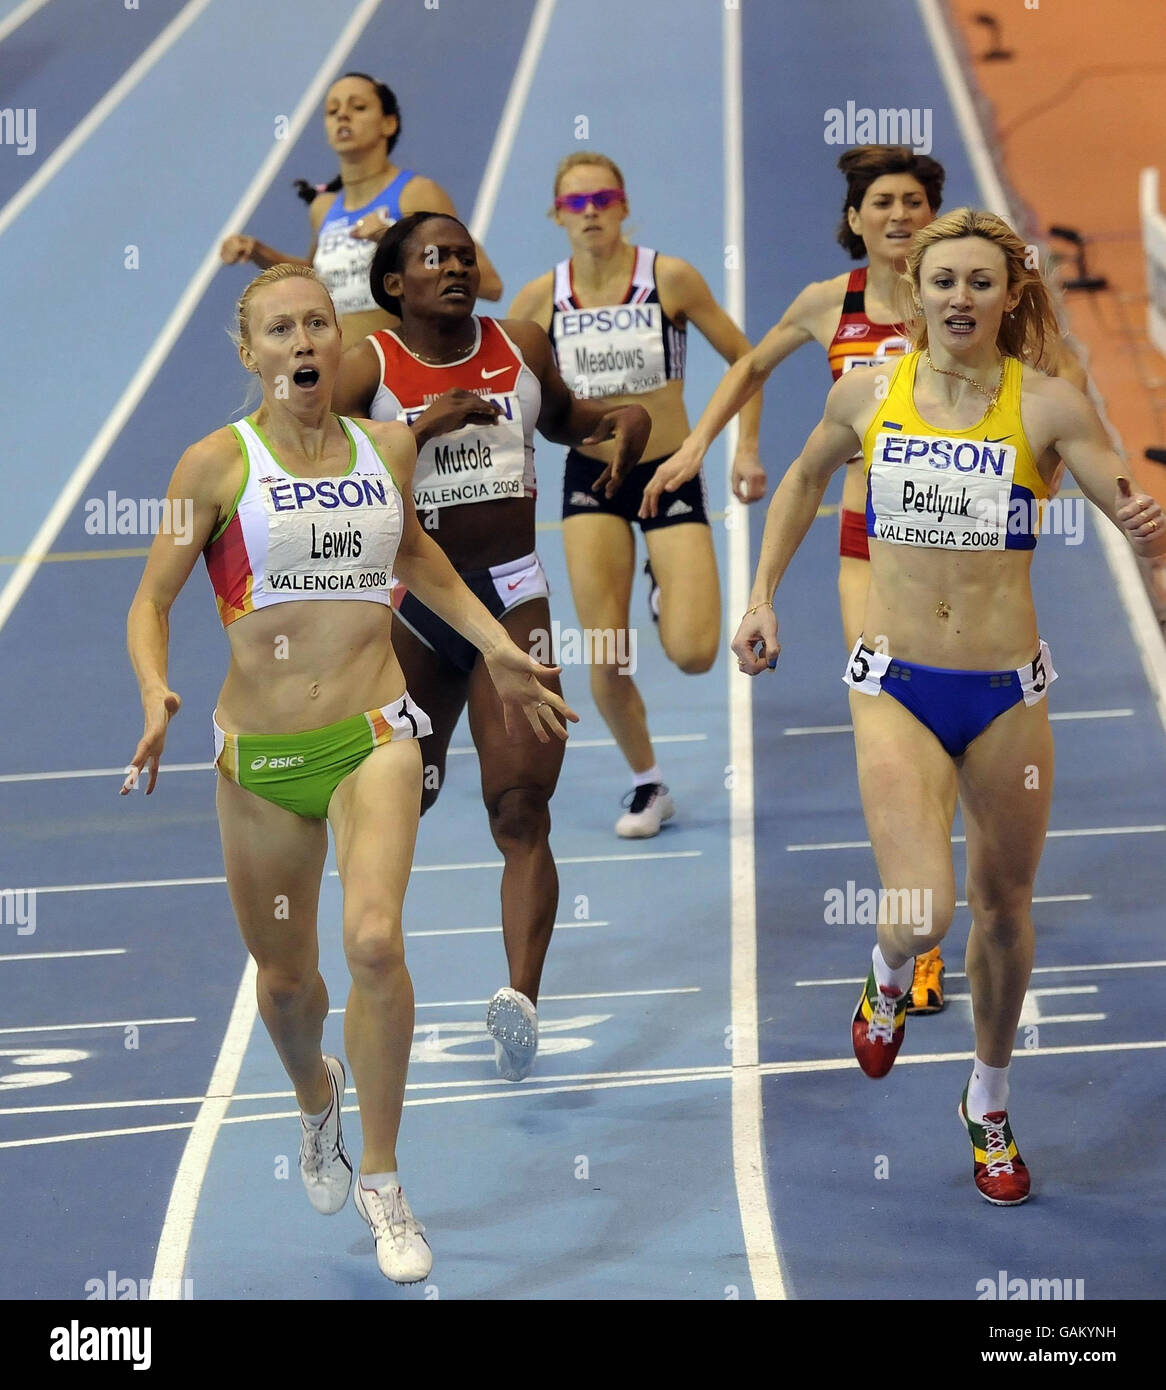 Australia's Tamsyn Lewis appears shocked as she beats Maria Mutola into third place with Great Britain's Jenny Meadows behind in the Finals of the Womens 8800m Event during the IAAF World Indoor Championships at the Palau Velodromo Luis Puig in Valencia, Spain. Stock Photo